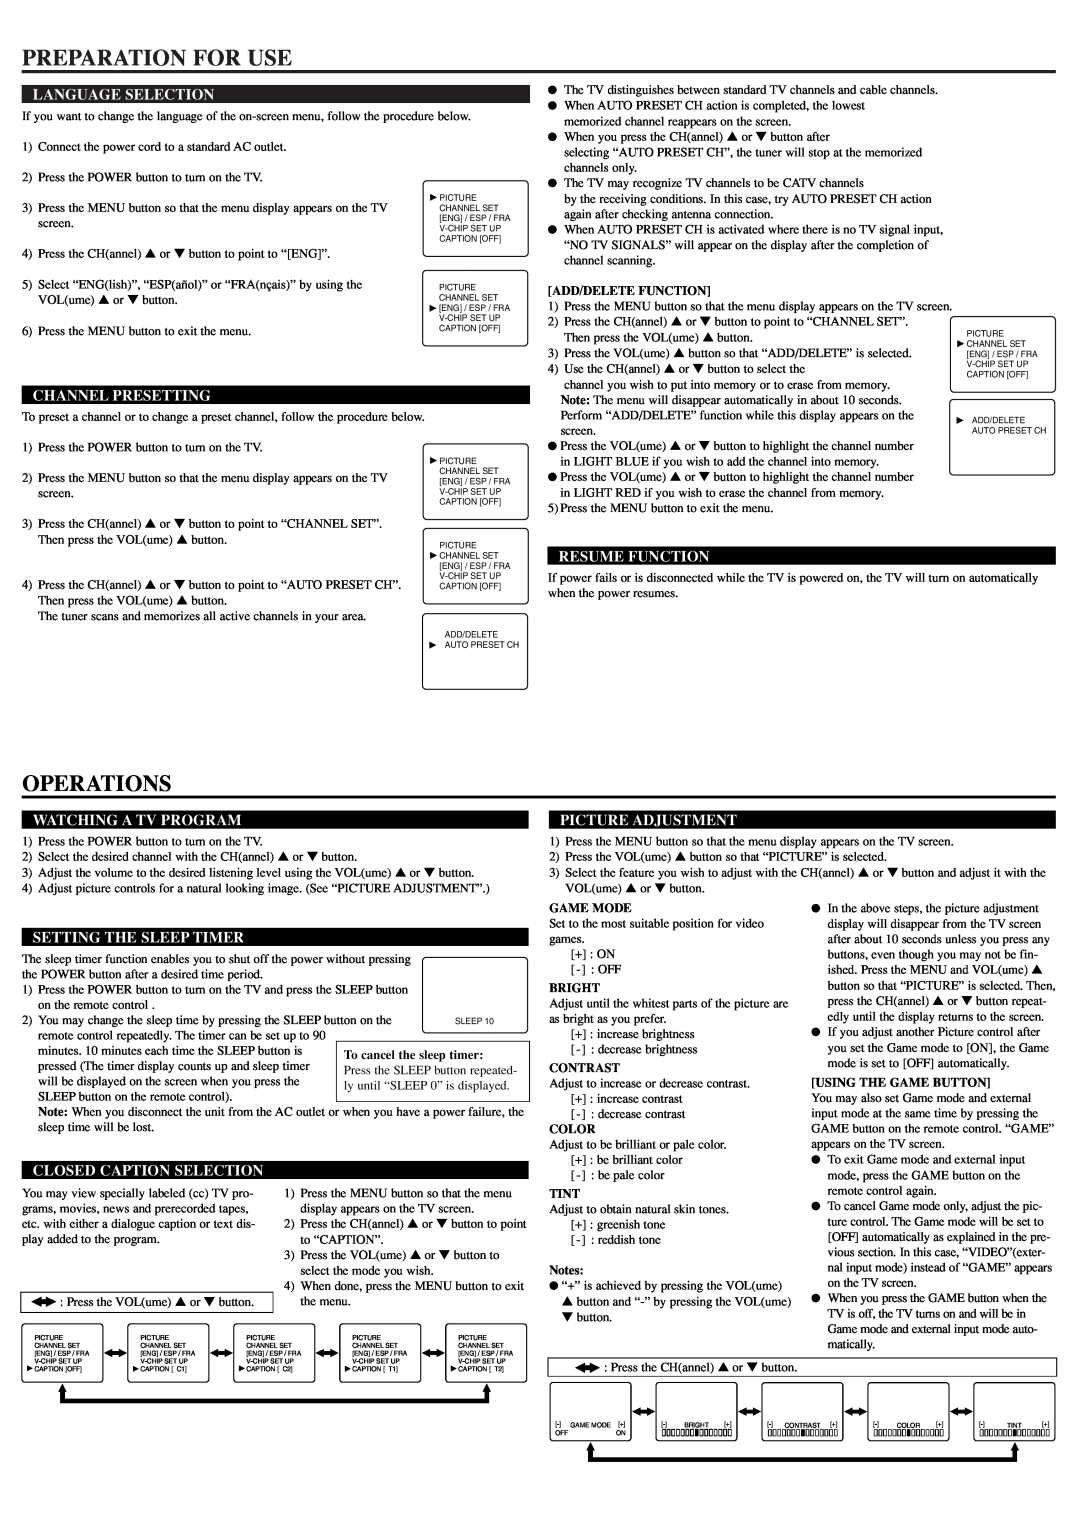 Sylvania RSET413E, RSET419E Preparation For Use, Operations, Language Selection, Channel Presetting, Resume Function 